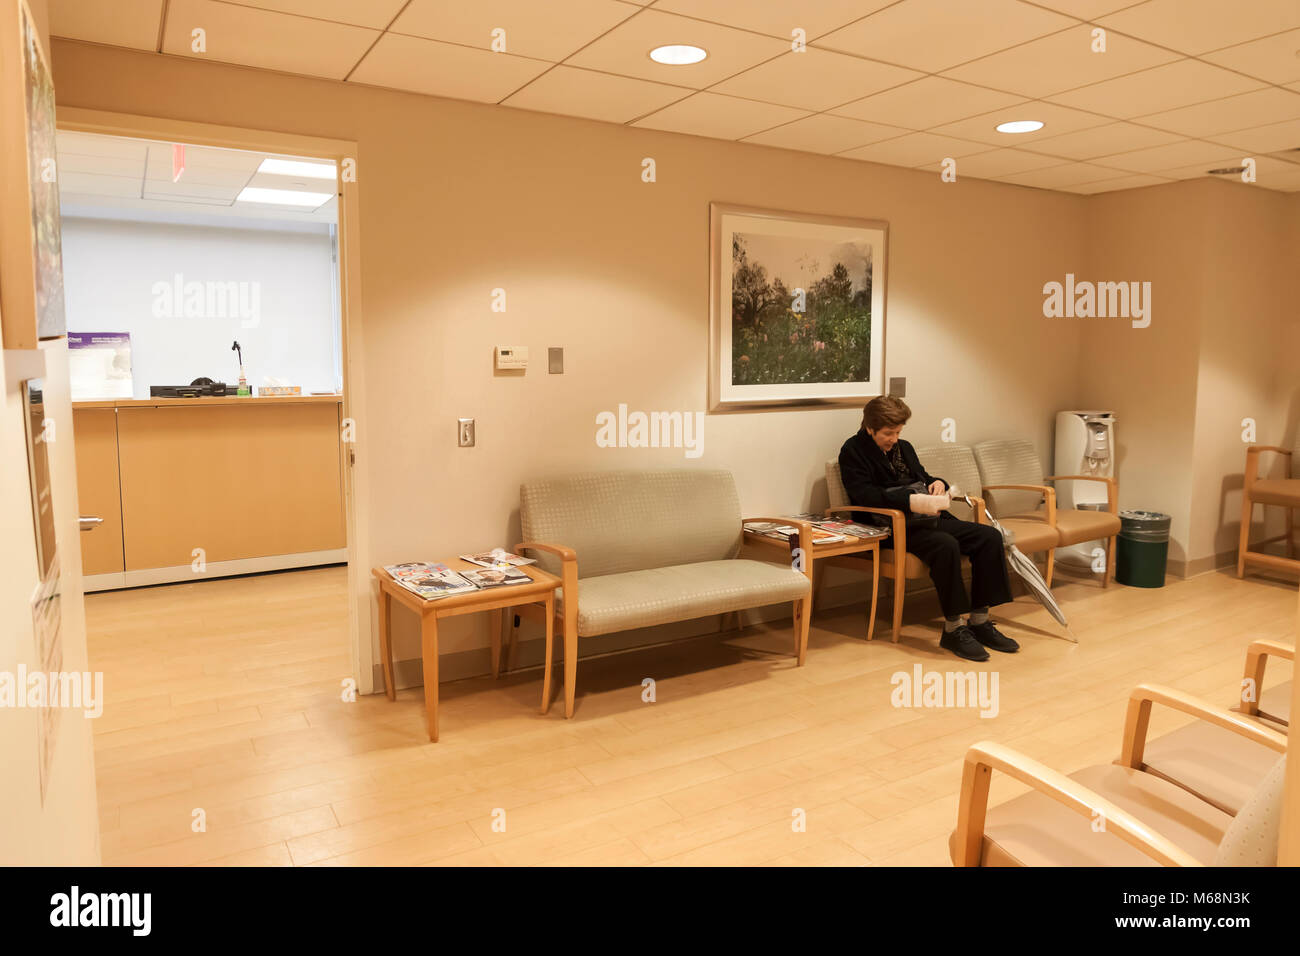 Female sitting in the waiting room of a doctor's office. Stock Photo